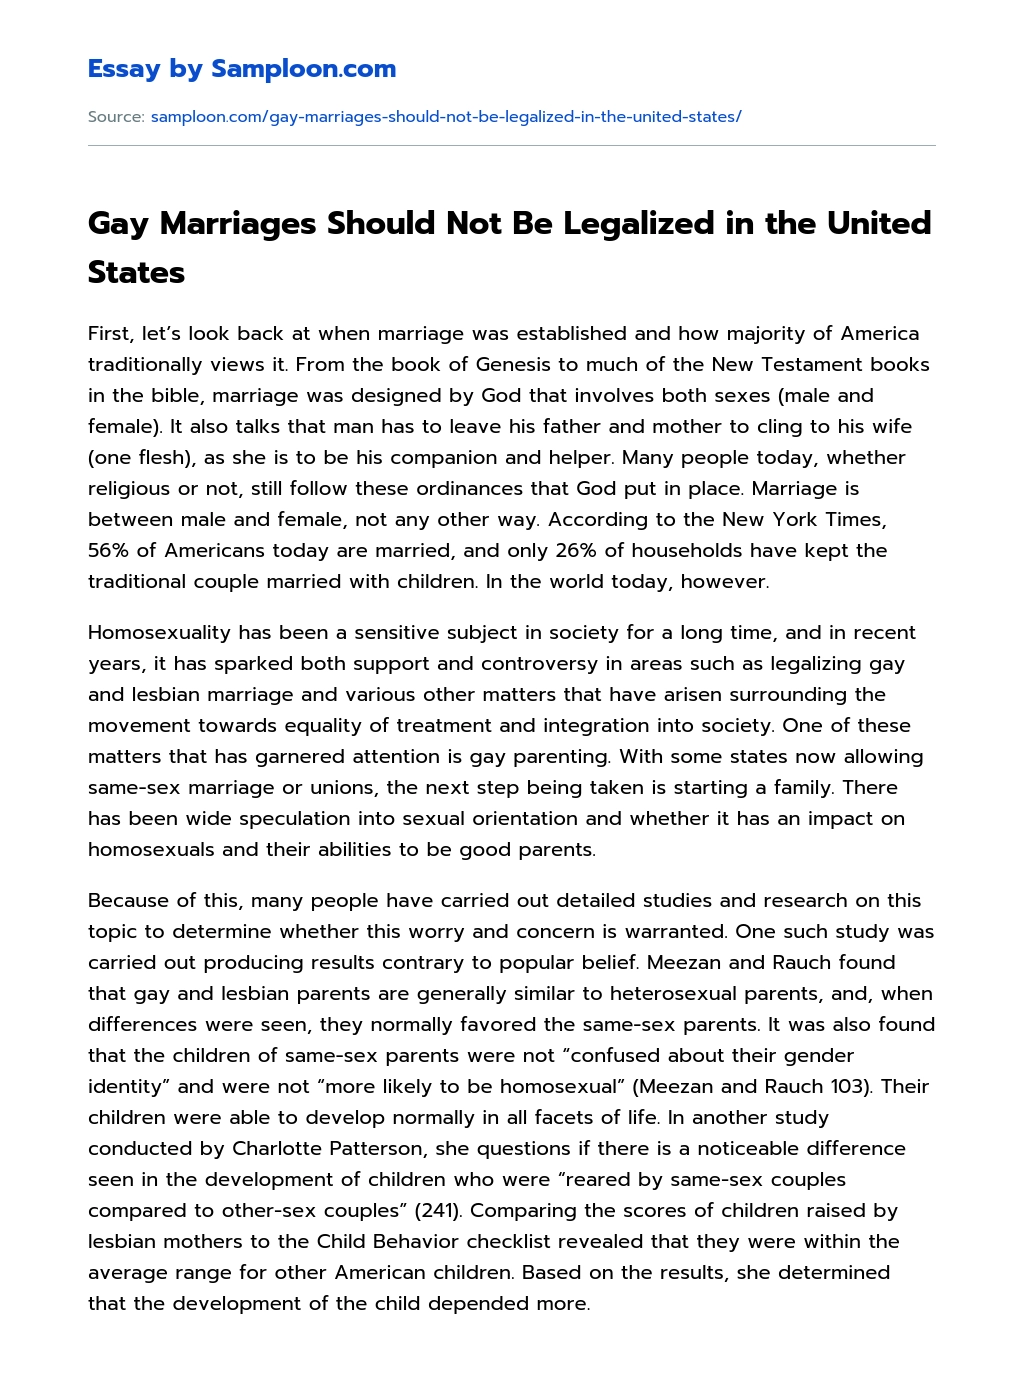 Gay Marriages Should Not Be Legalized in the United States essay